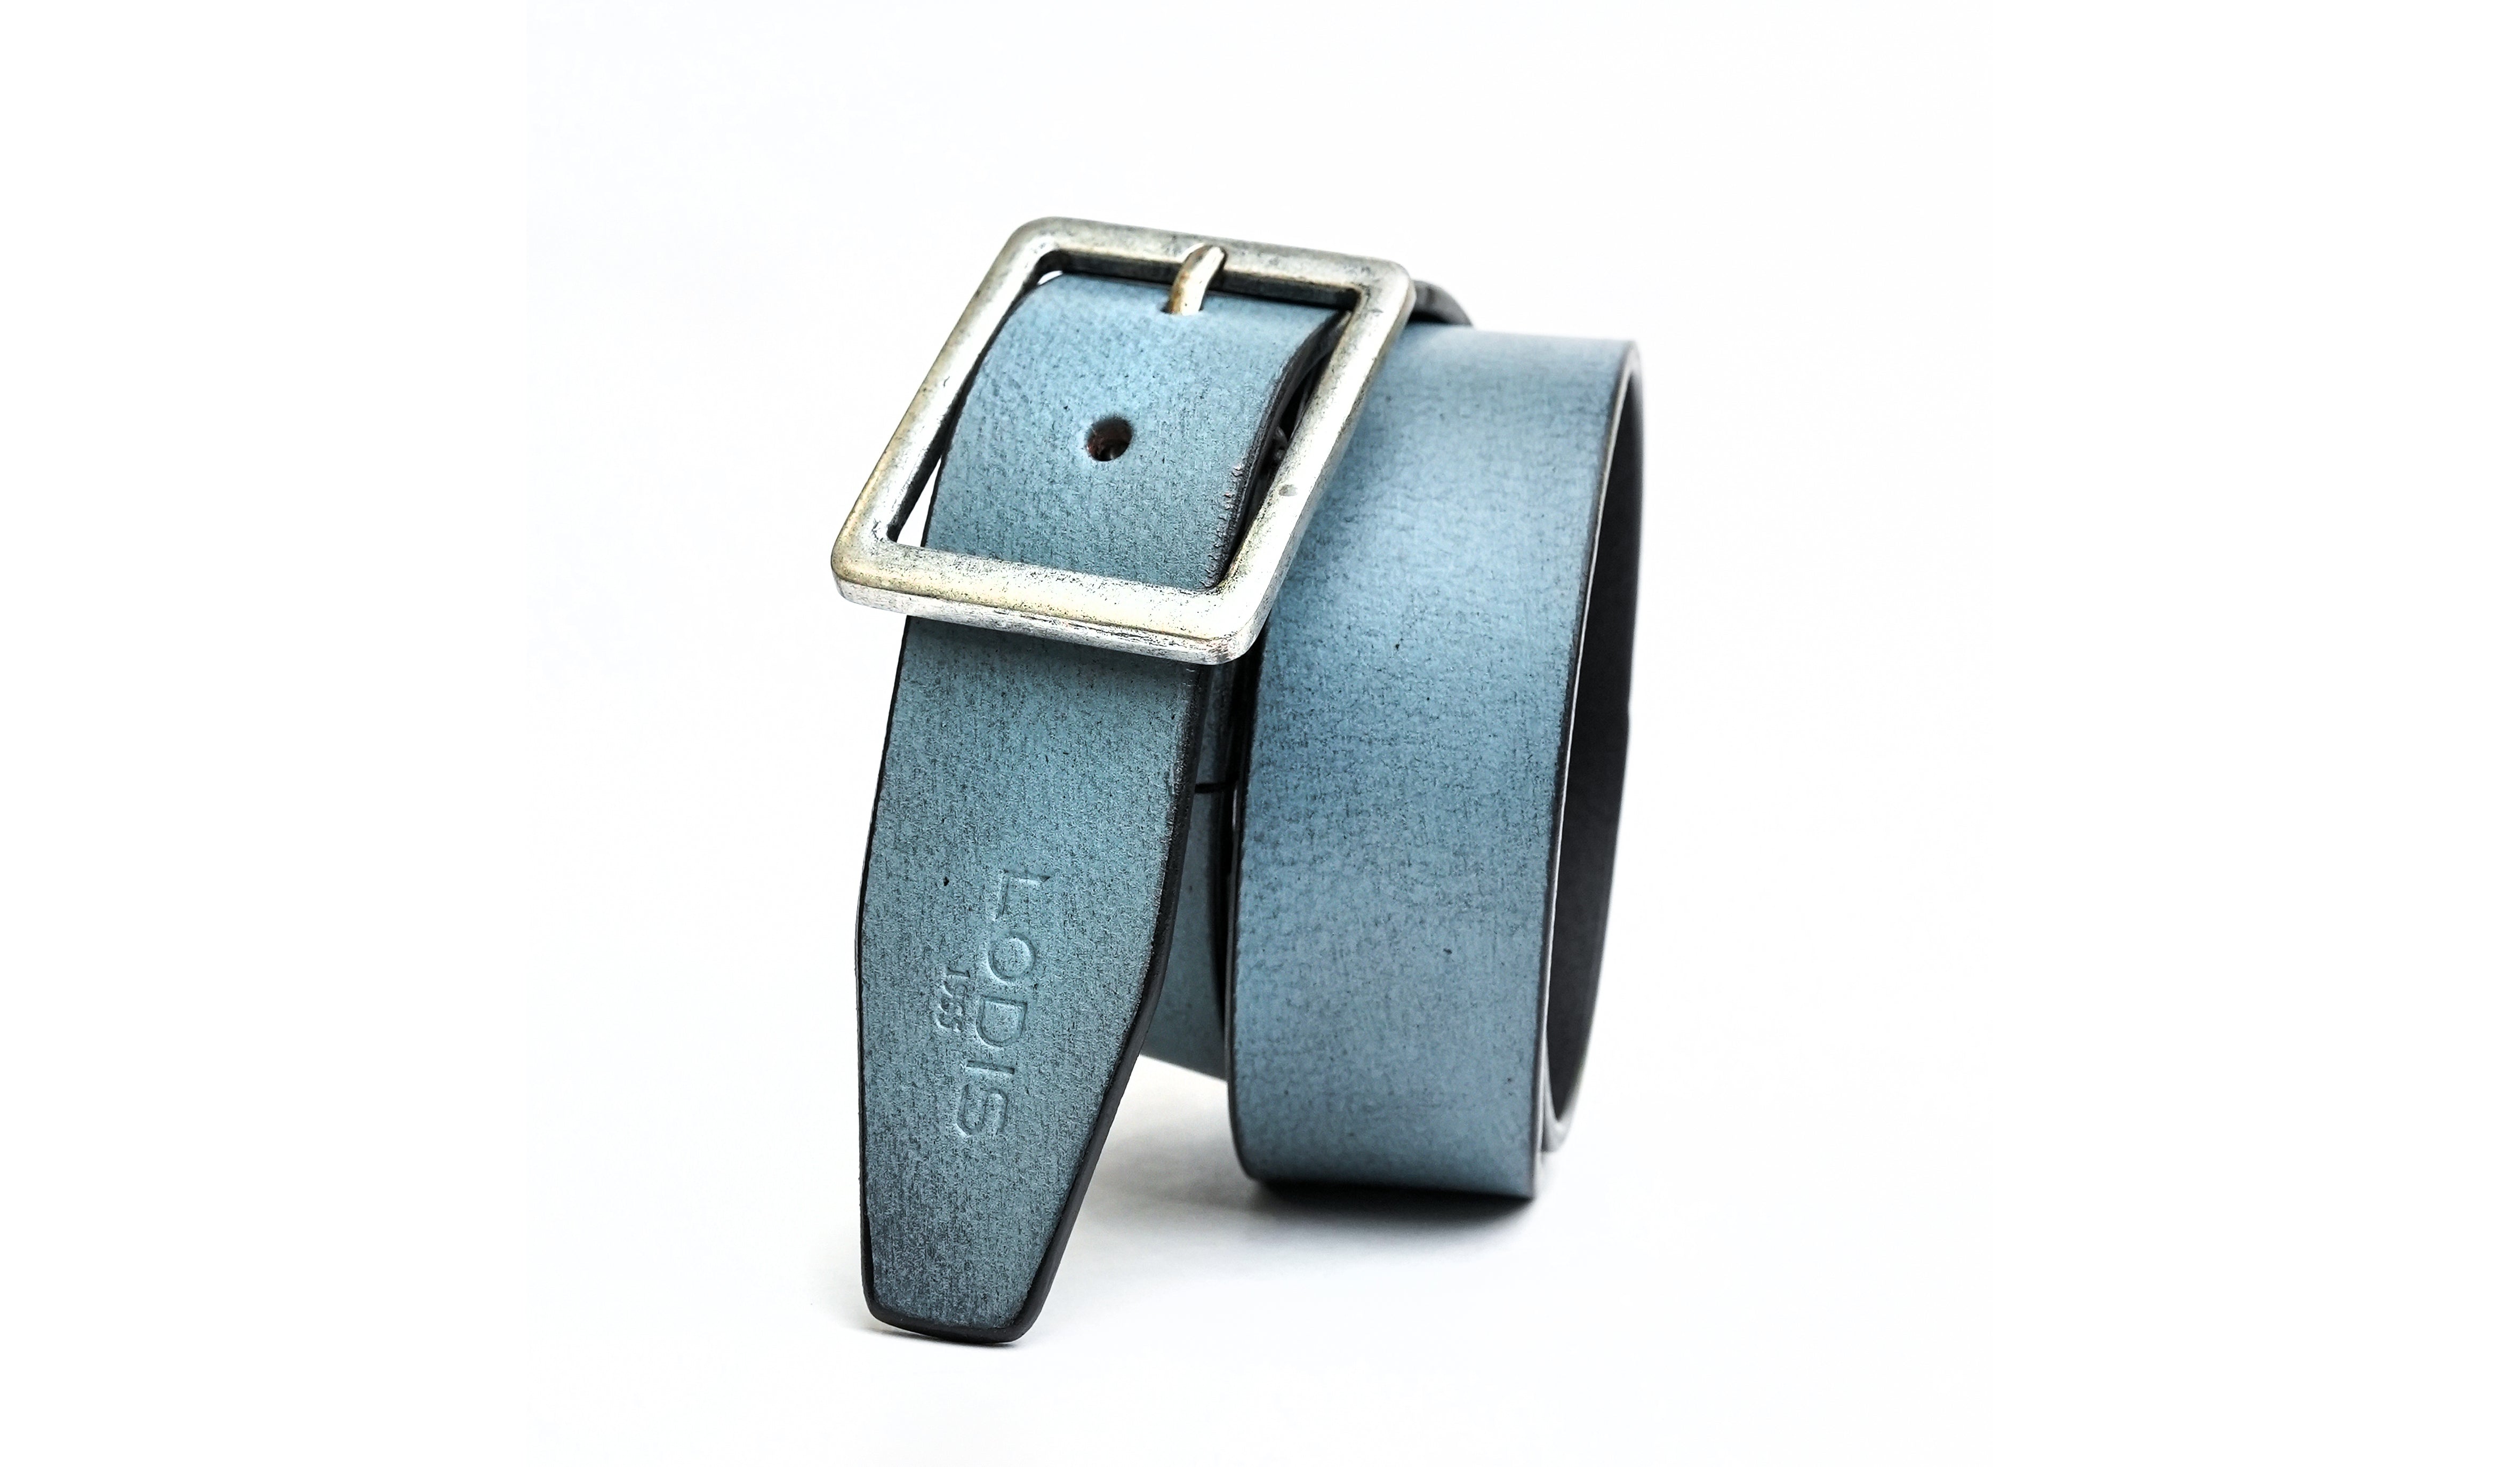 Buy Now The Stylish Top Grain Leather Belt Buckle | Lodis 